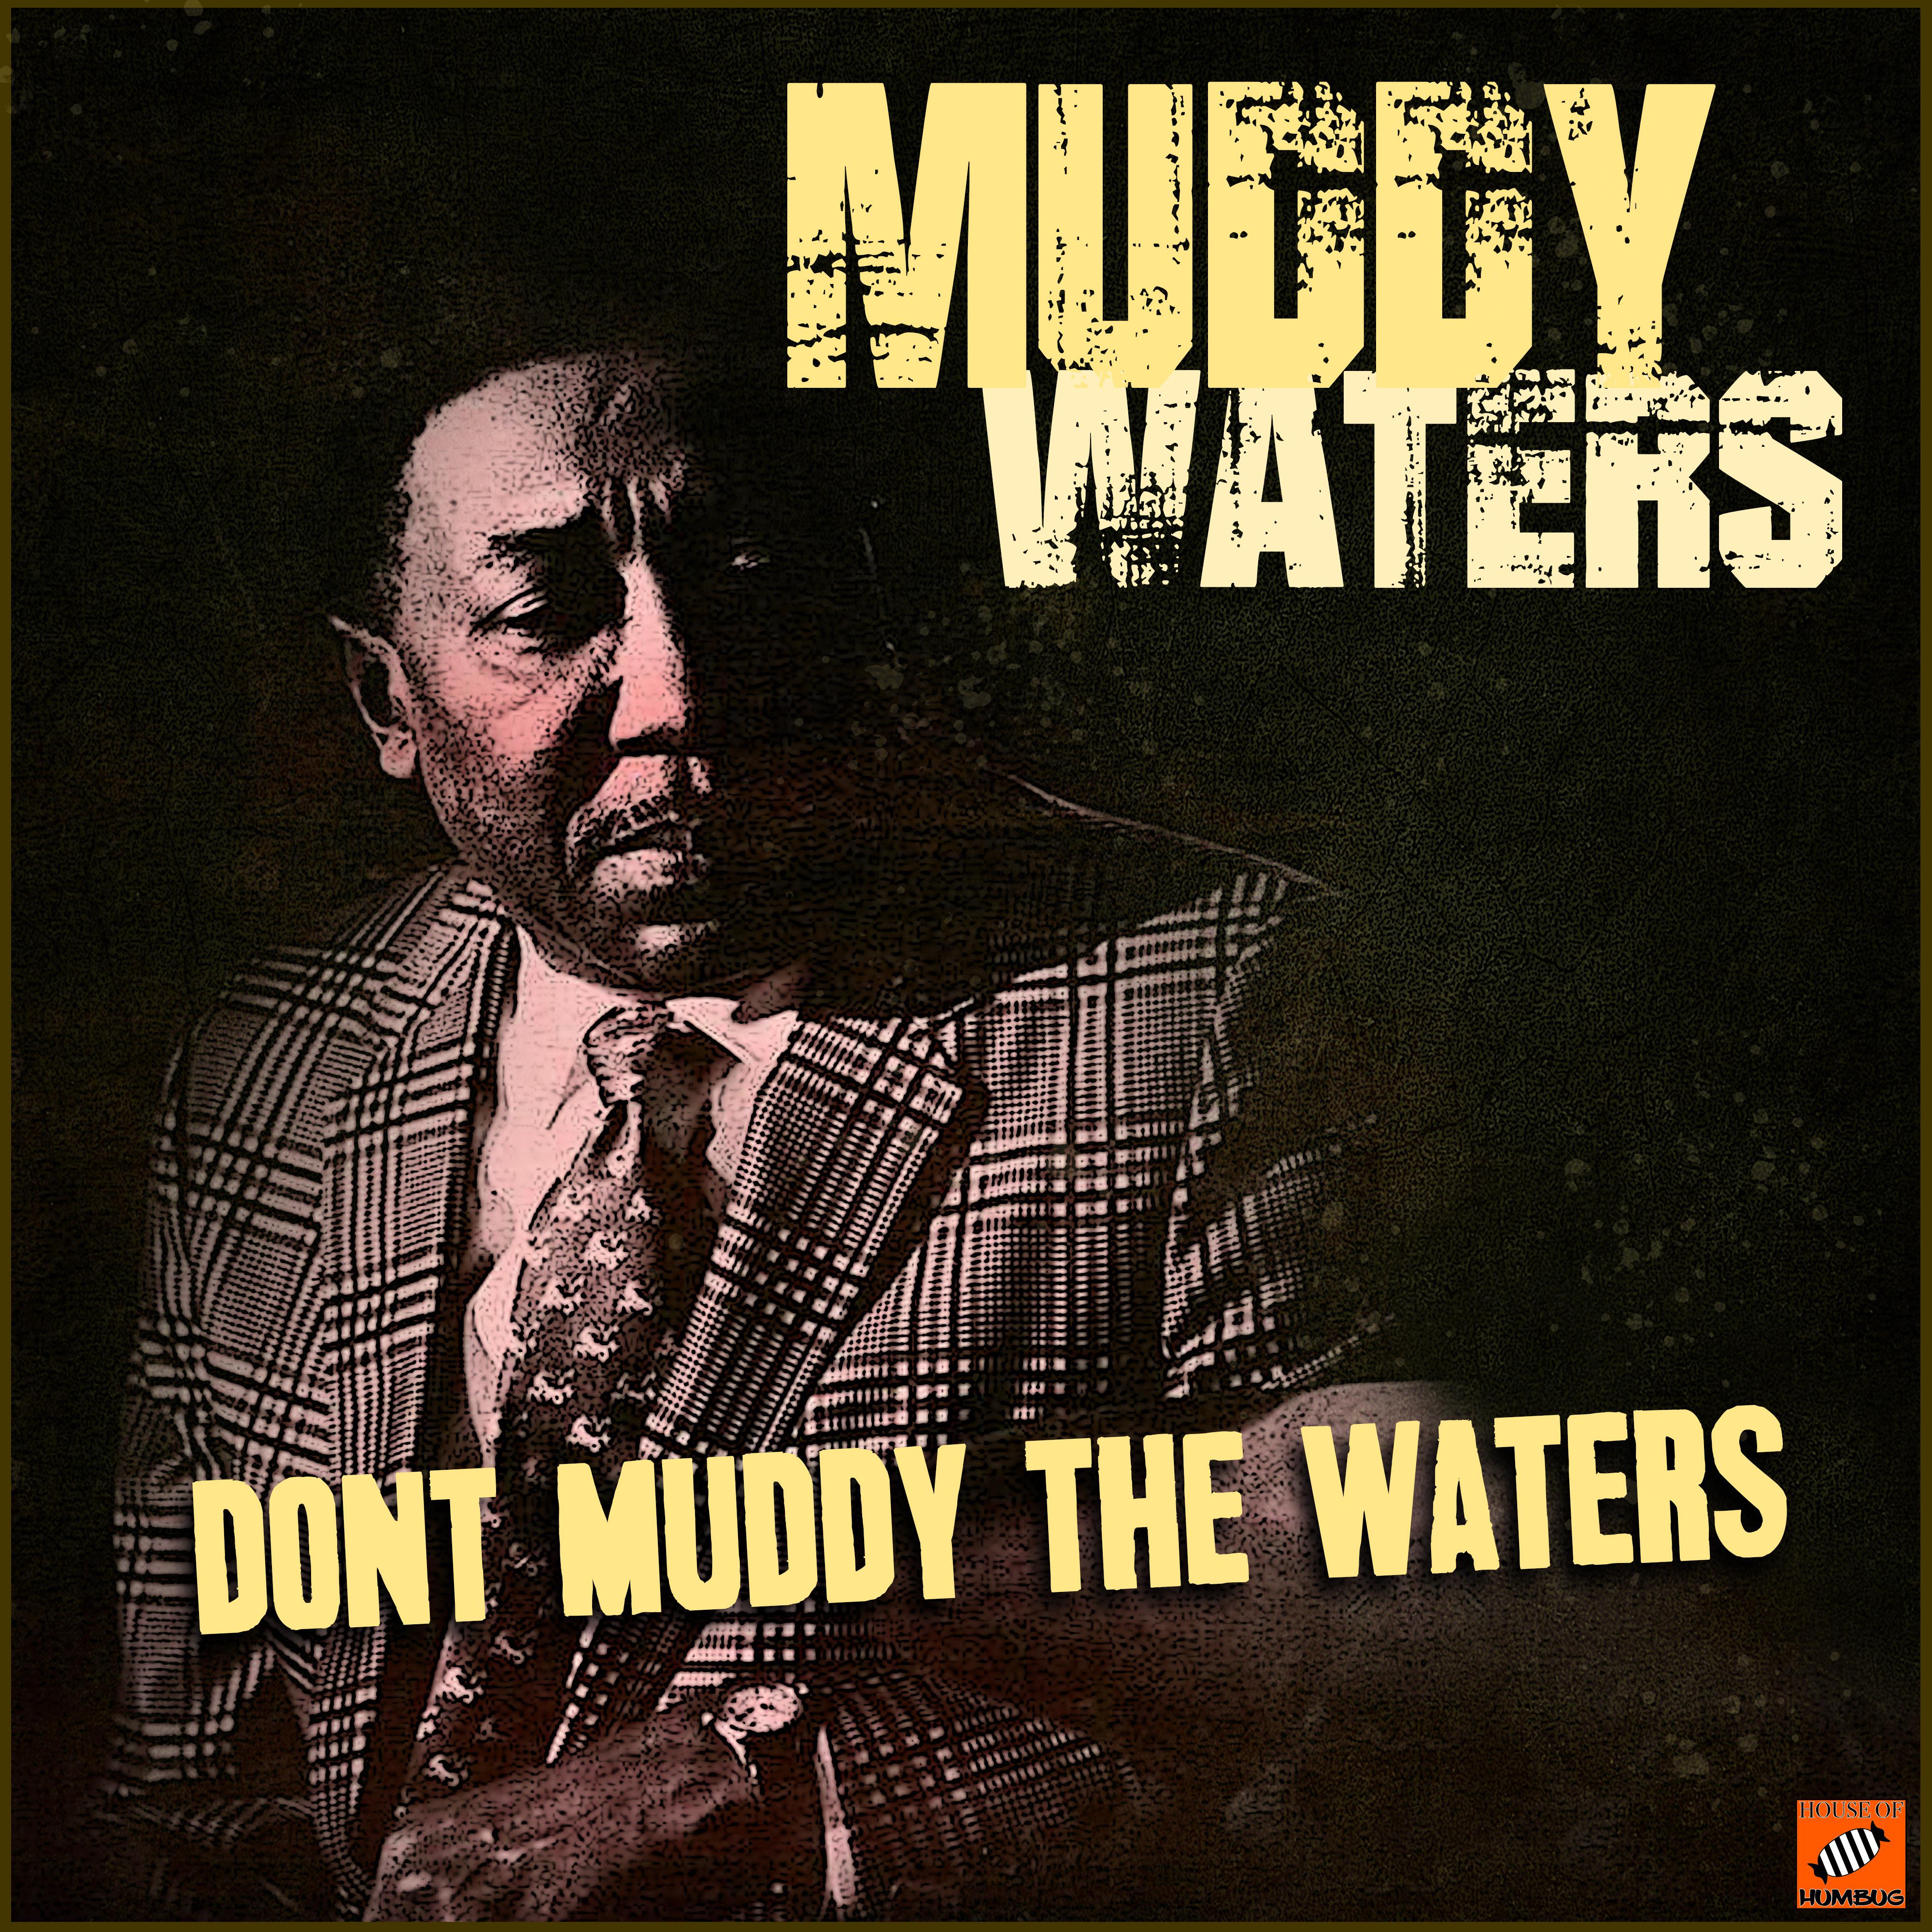 Don't Muddy The Waters